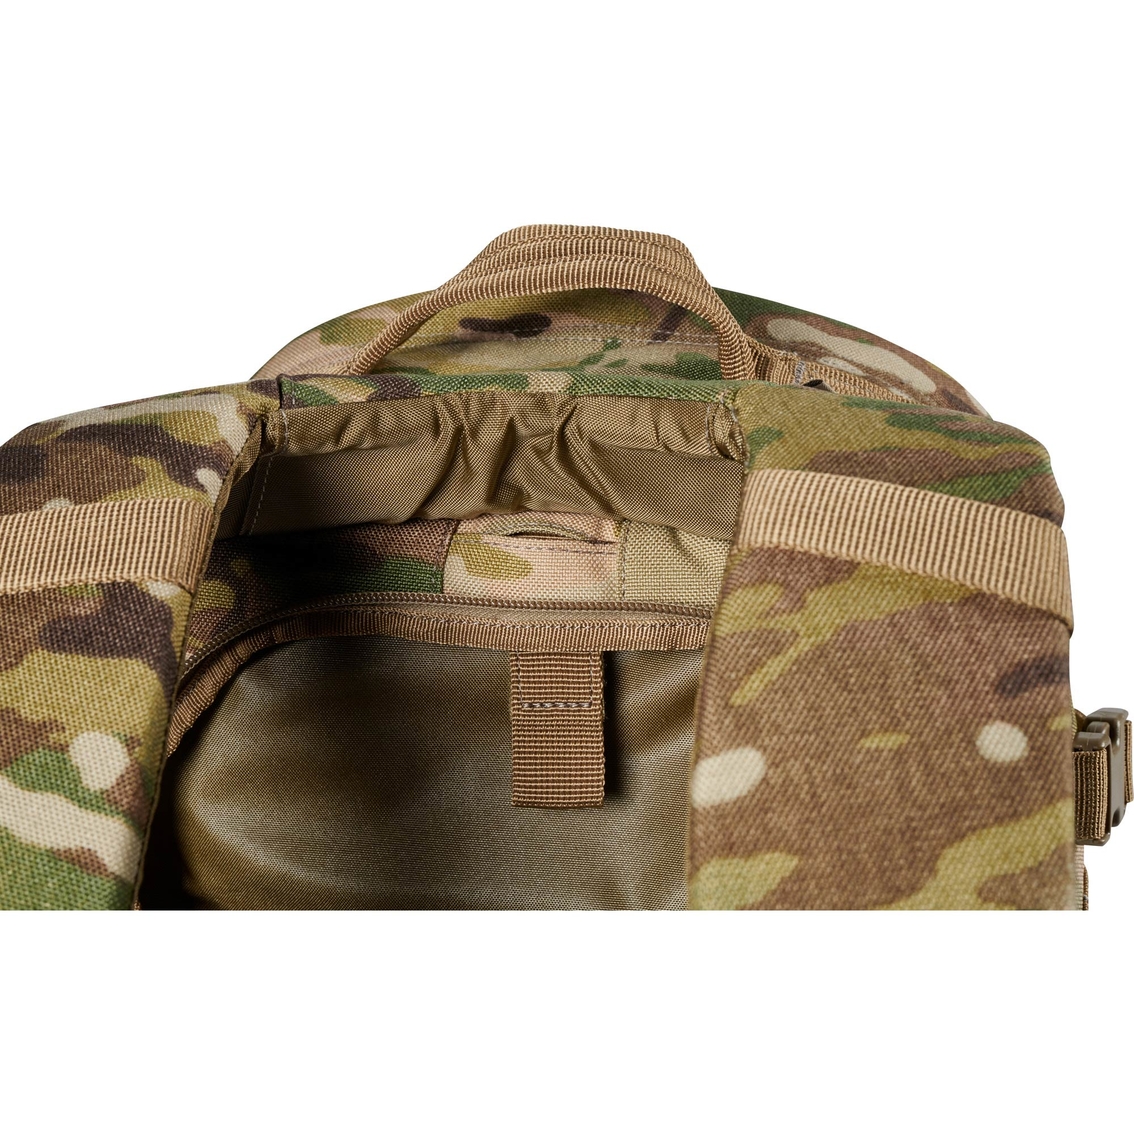 5.11 RUSH 12 2.0 Backpack - Image 9 of 9